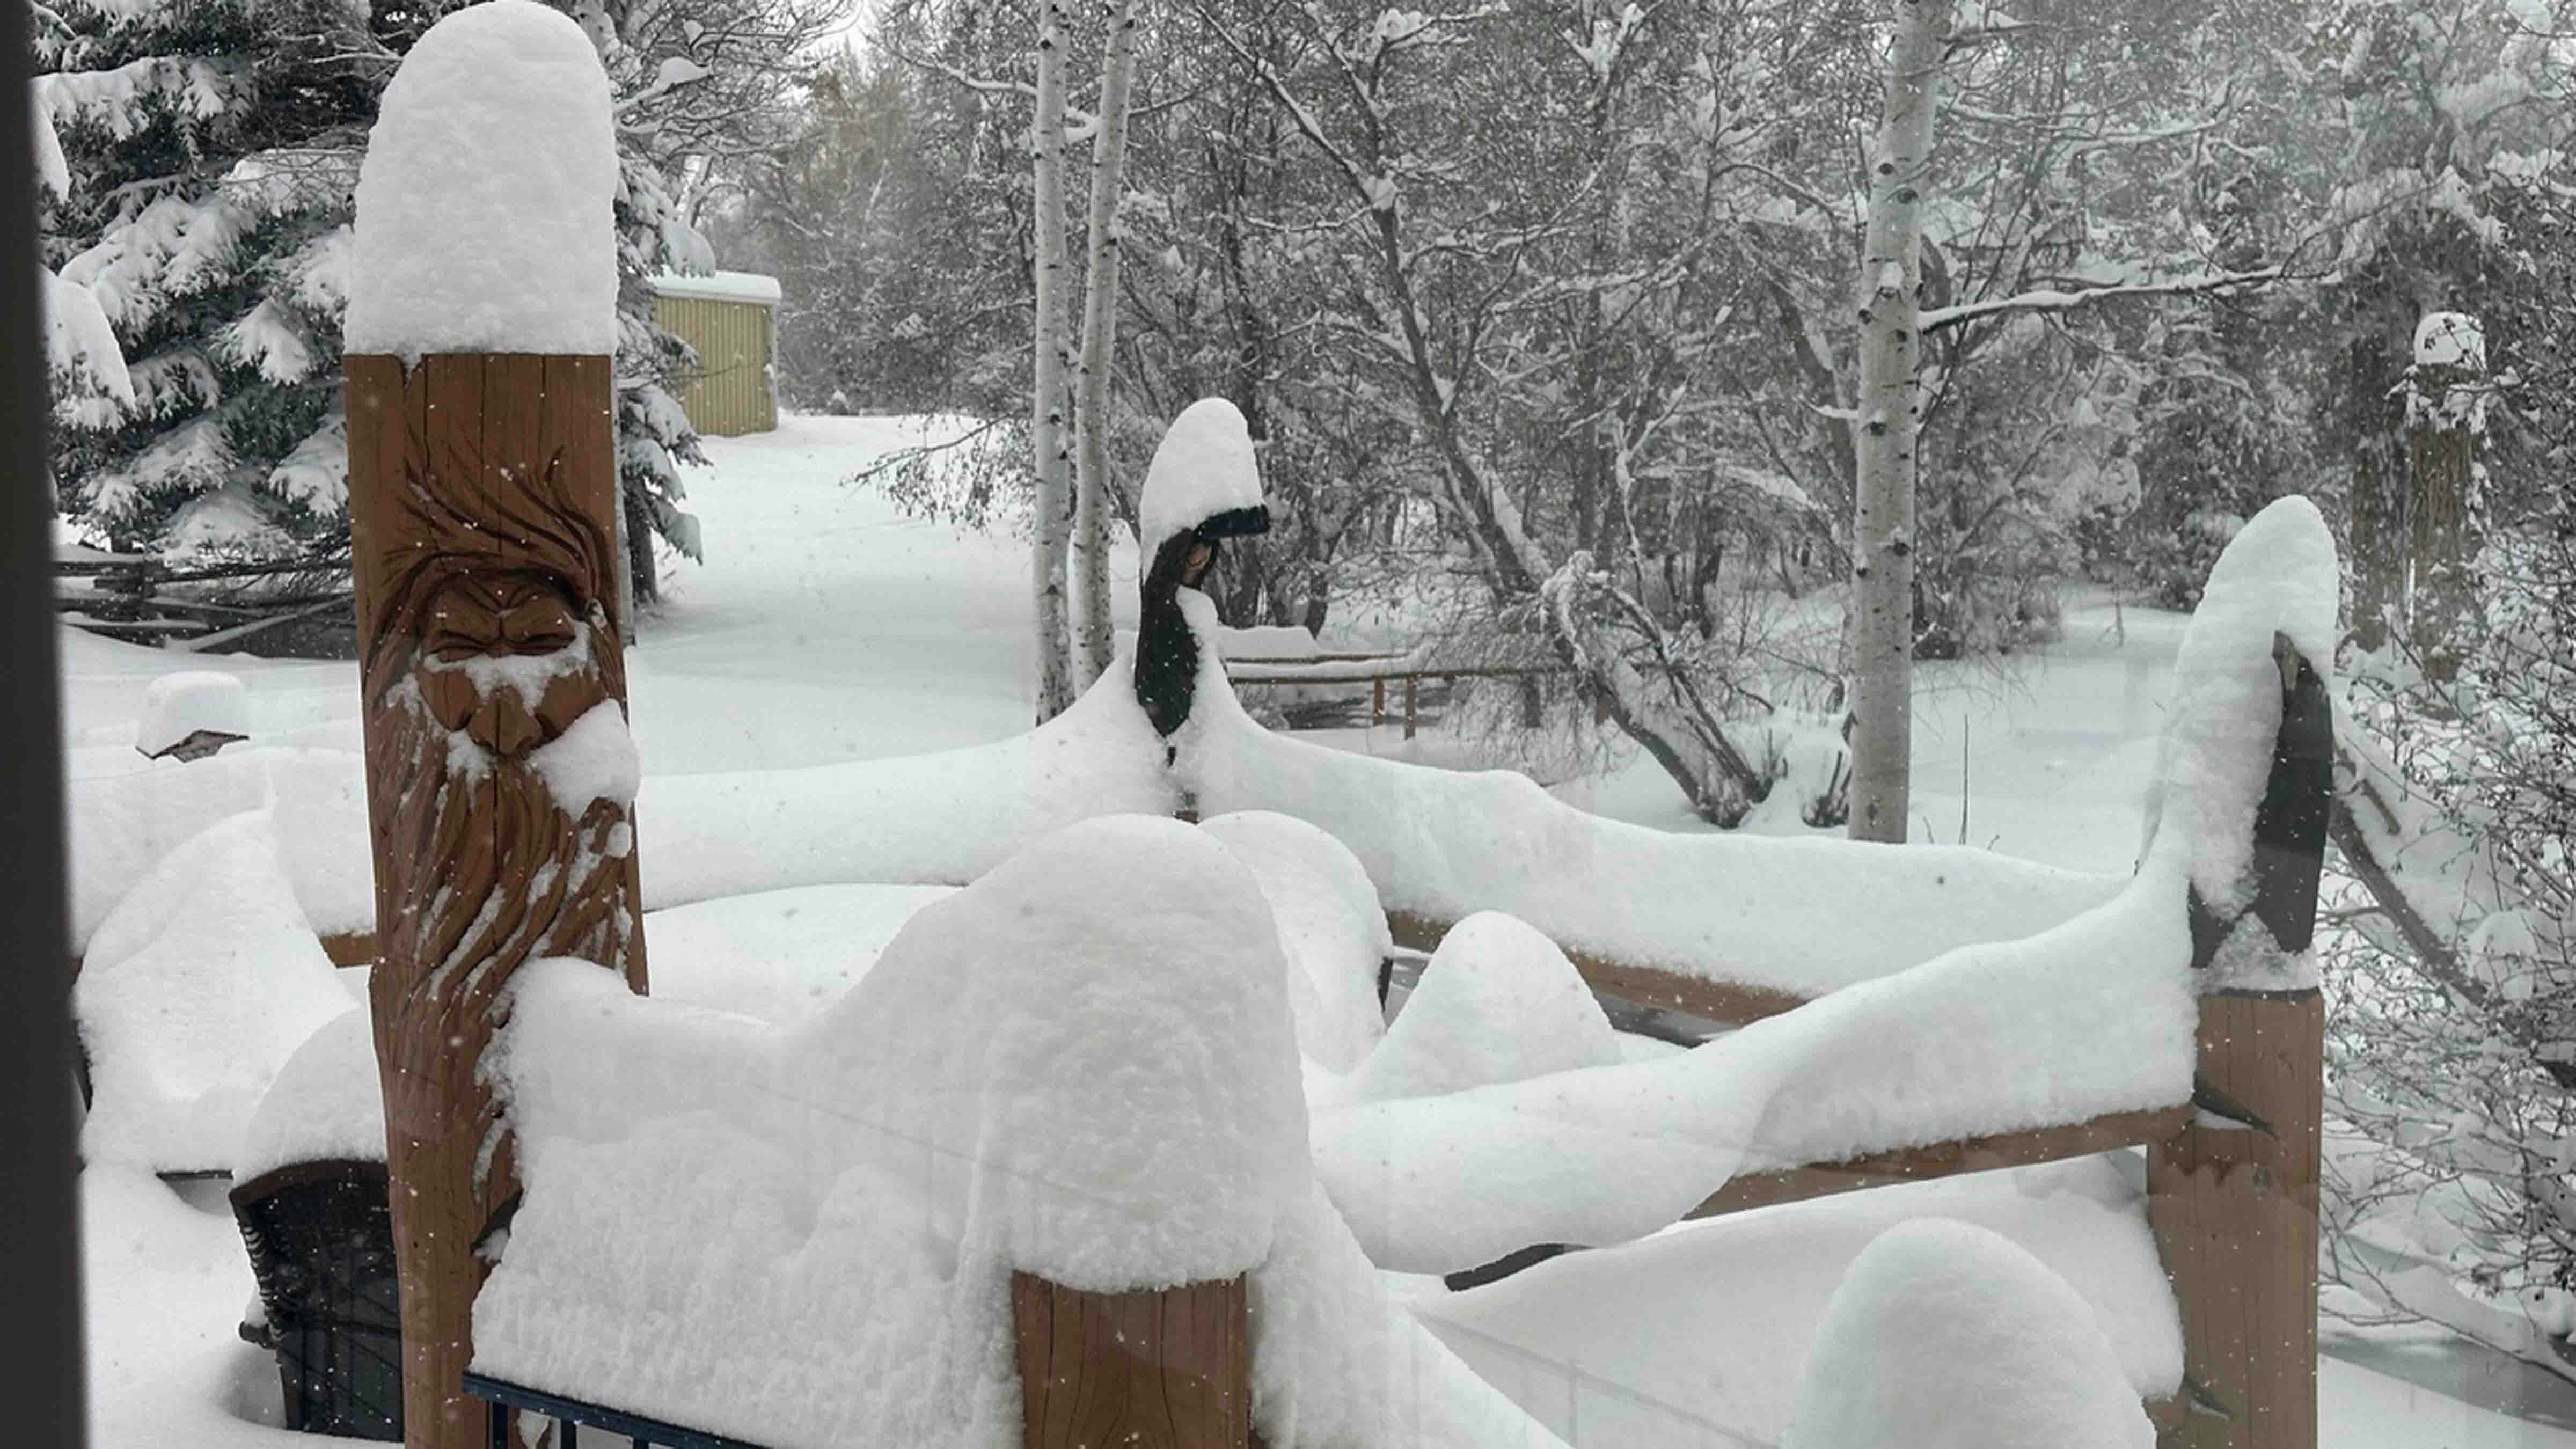 The wind does not blow much in Lander. Here is the snow piling up on the back deck at the Sniffin home.